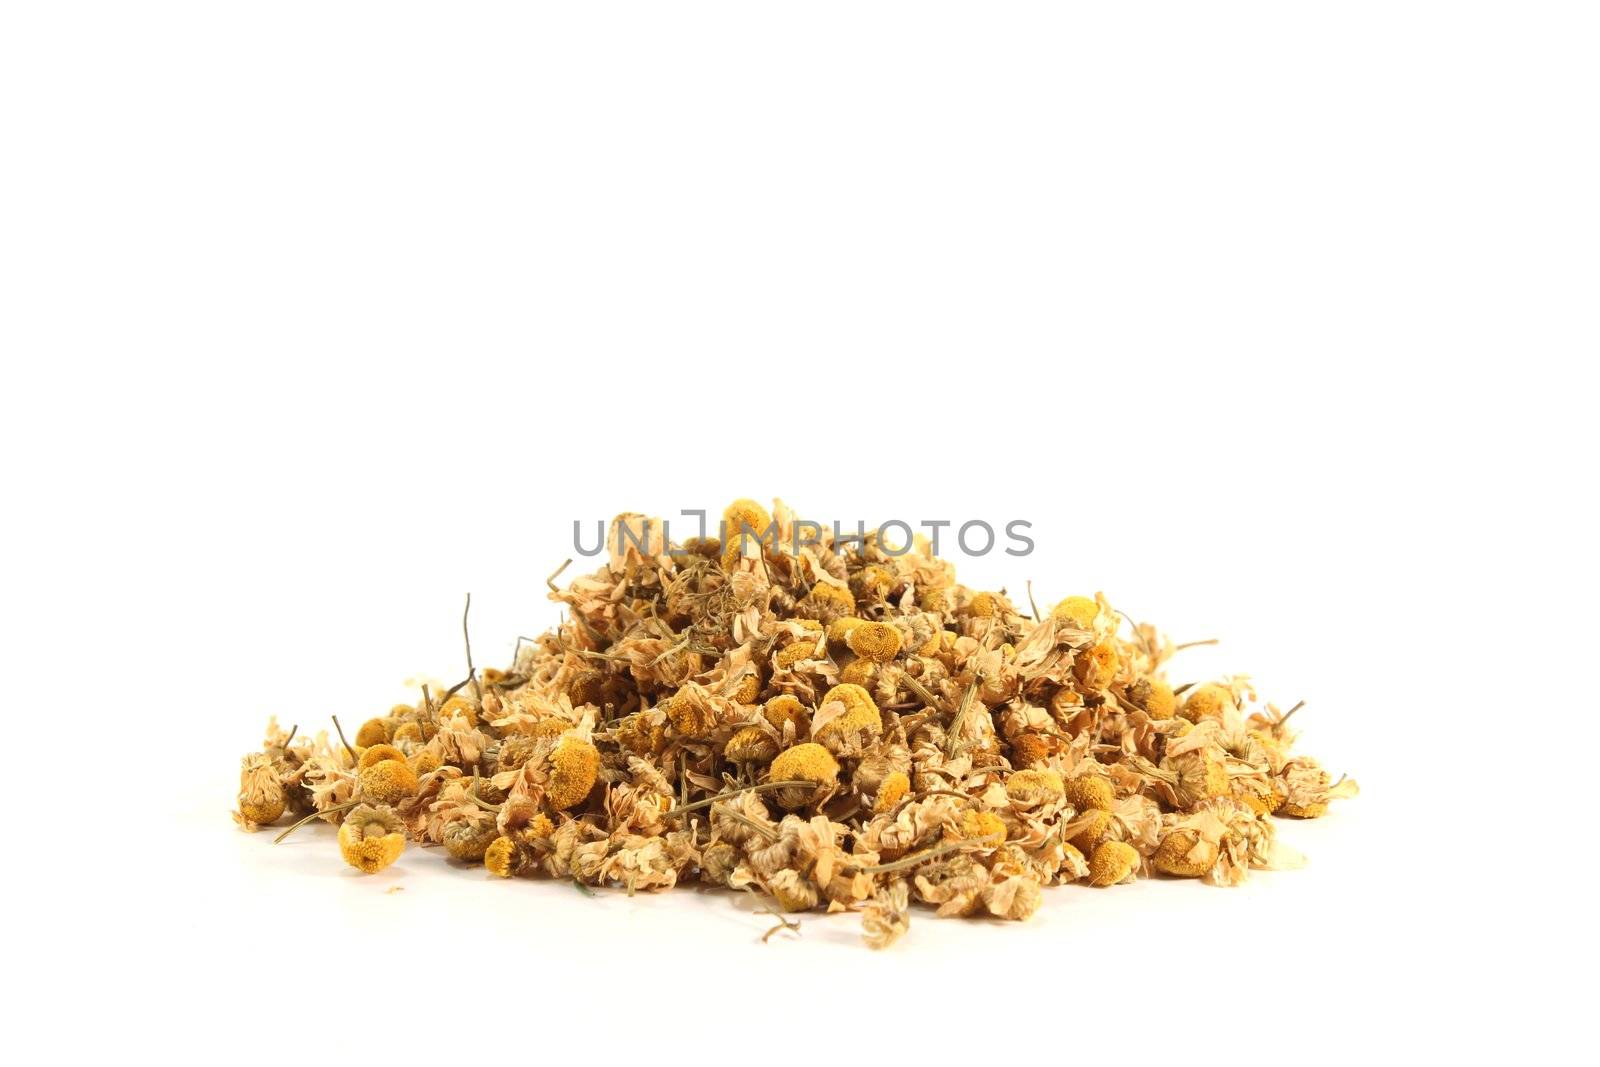 dried yellow chamomile flowers on a white background